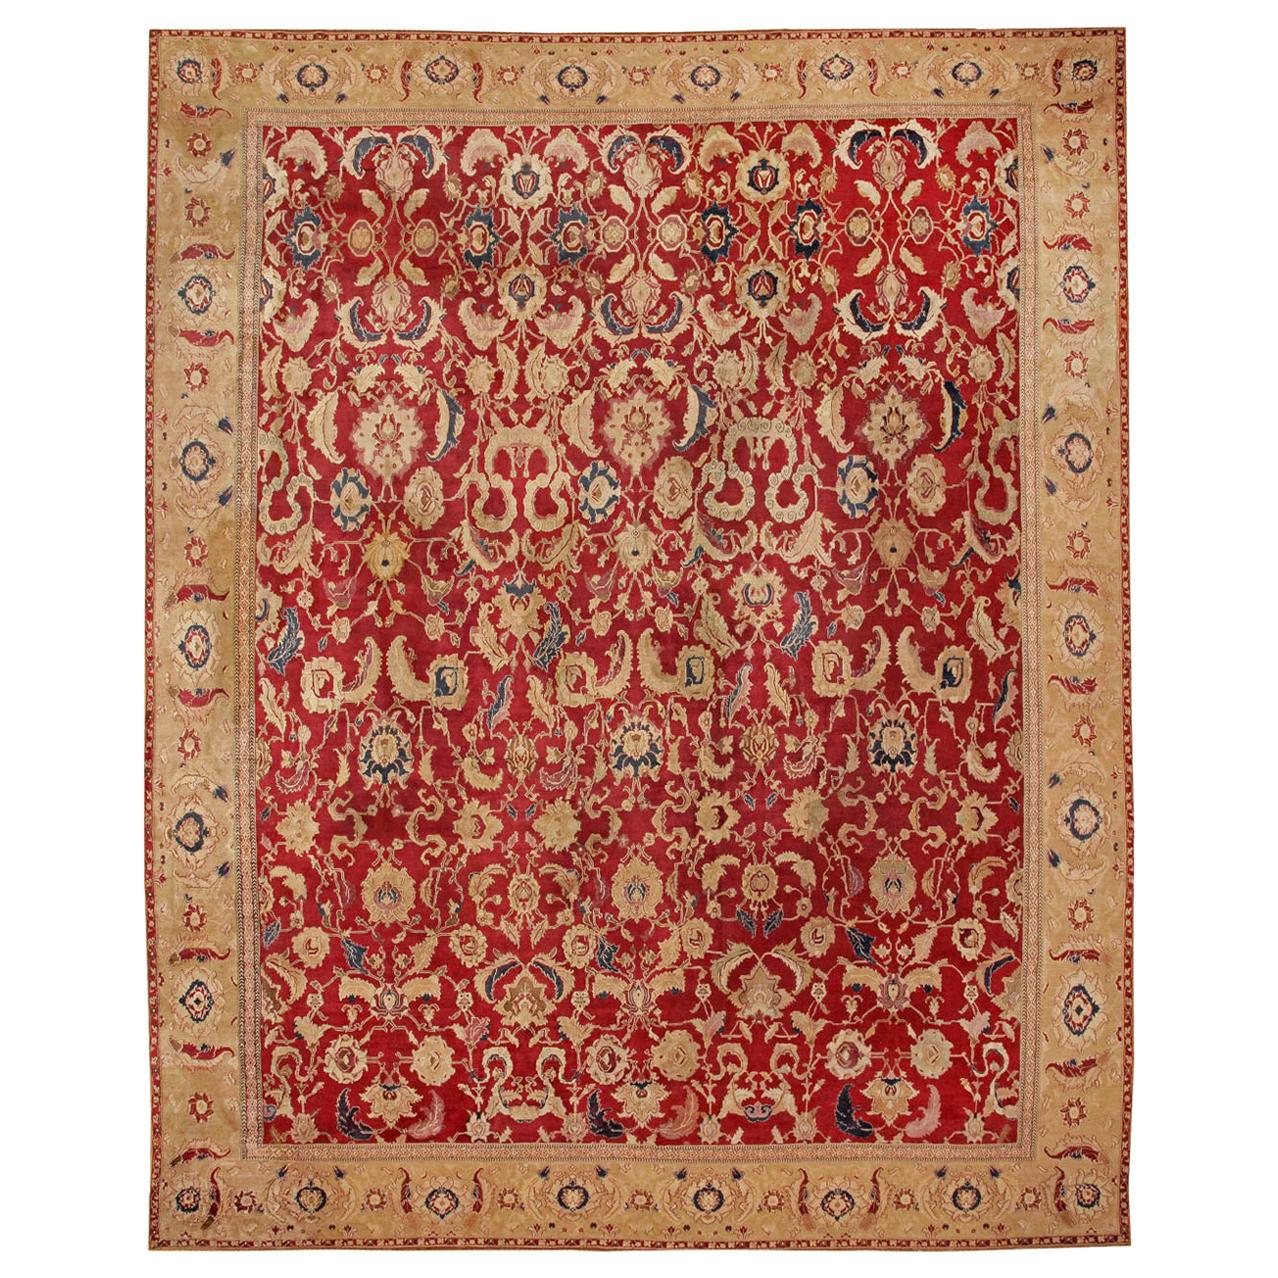 Nazmiyal Collection Antique Indian Agra Carpet. Size: 16 ft 7 in x 20 ft 10 in